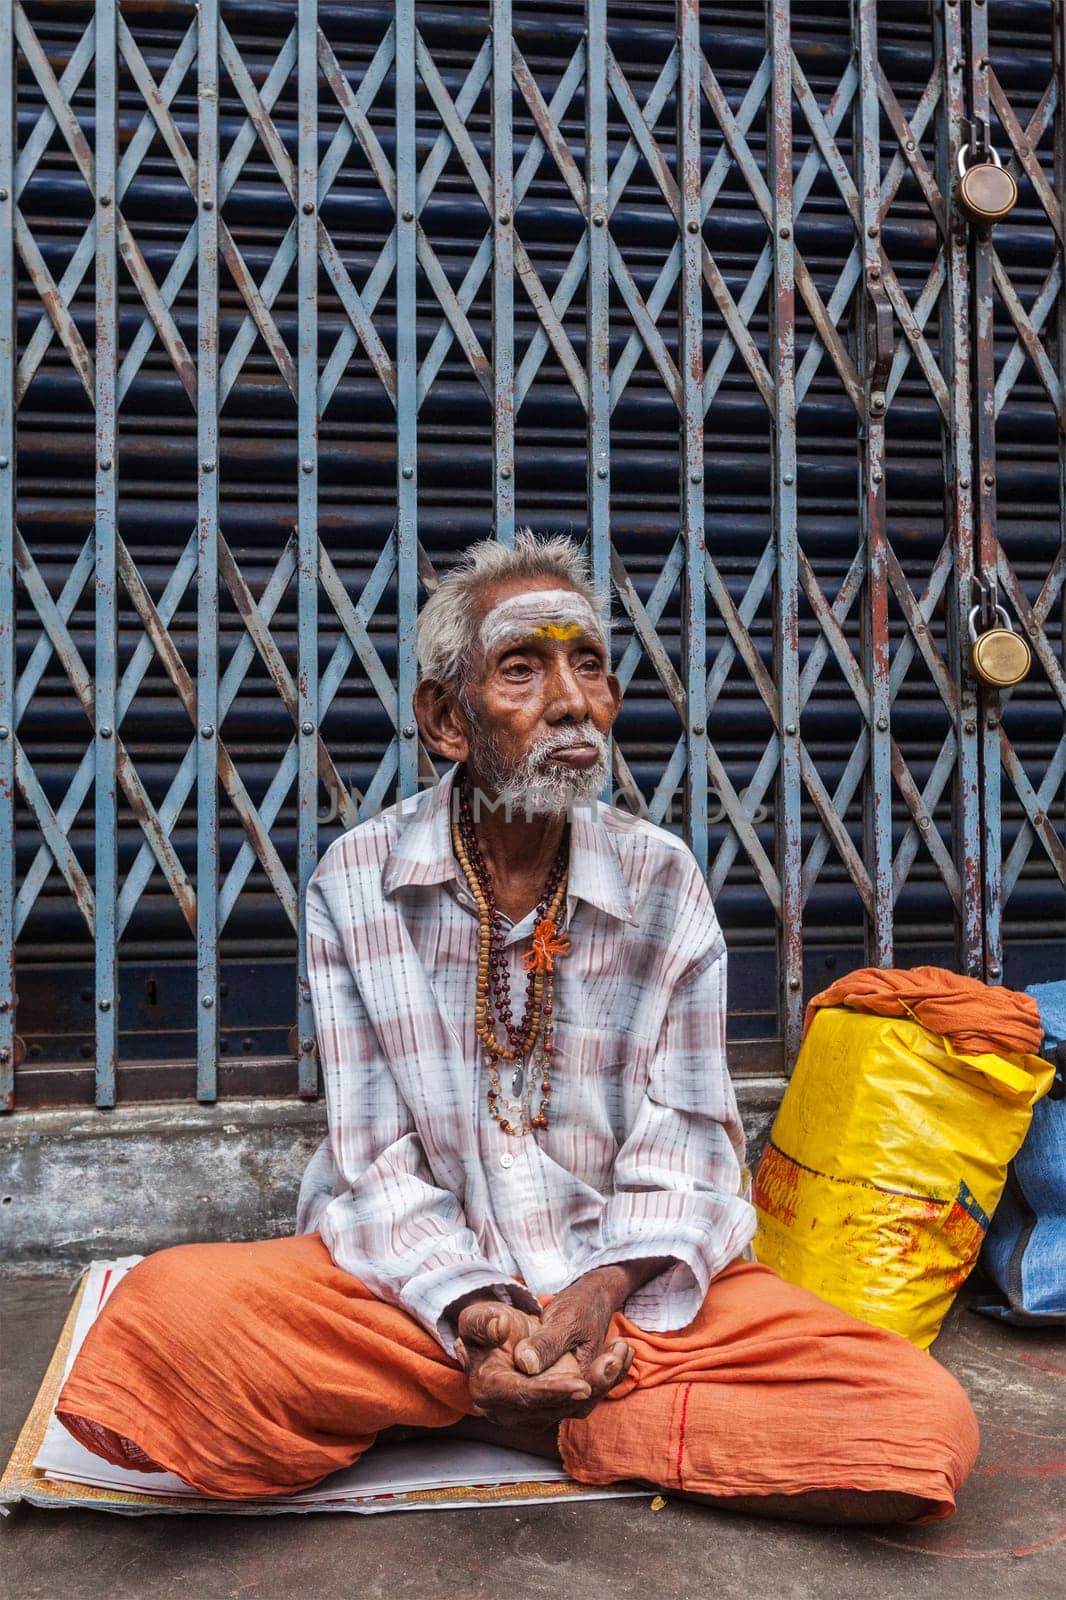 TIRUCHIRAPALLI, INDIA - FEBRUARY 14, 2013: Unidentified old Indian man in the street